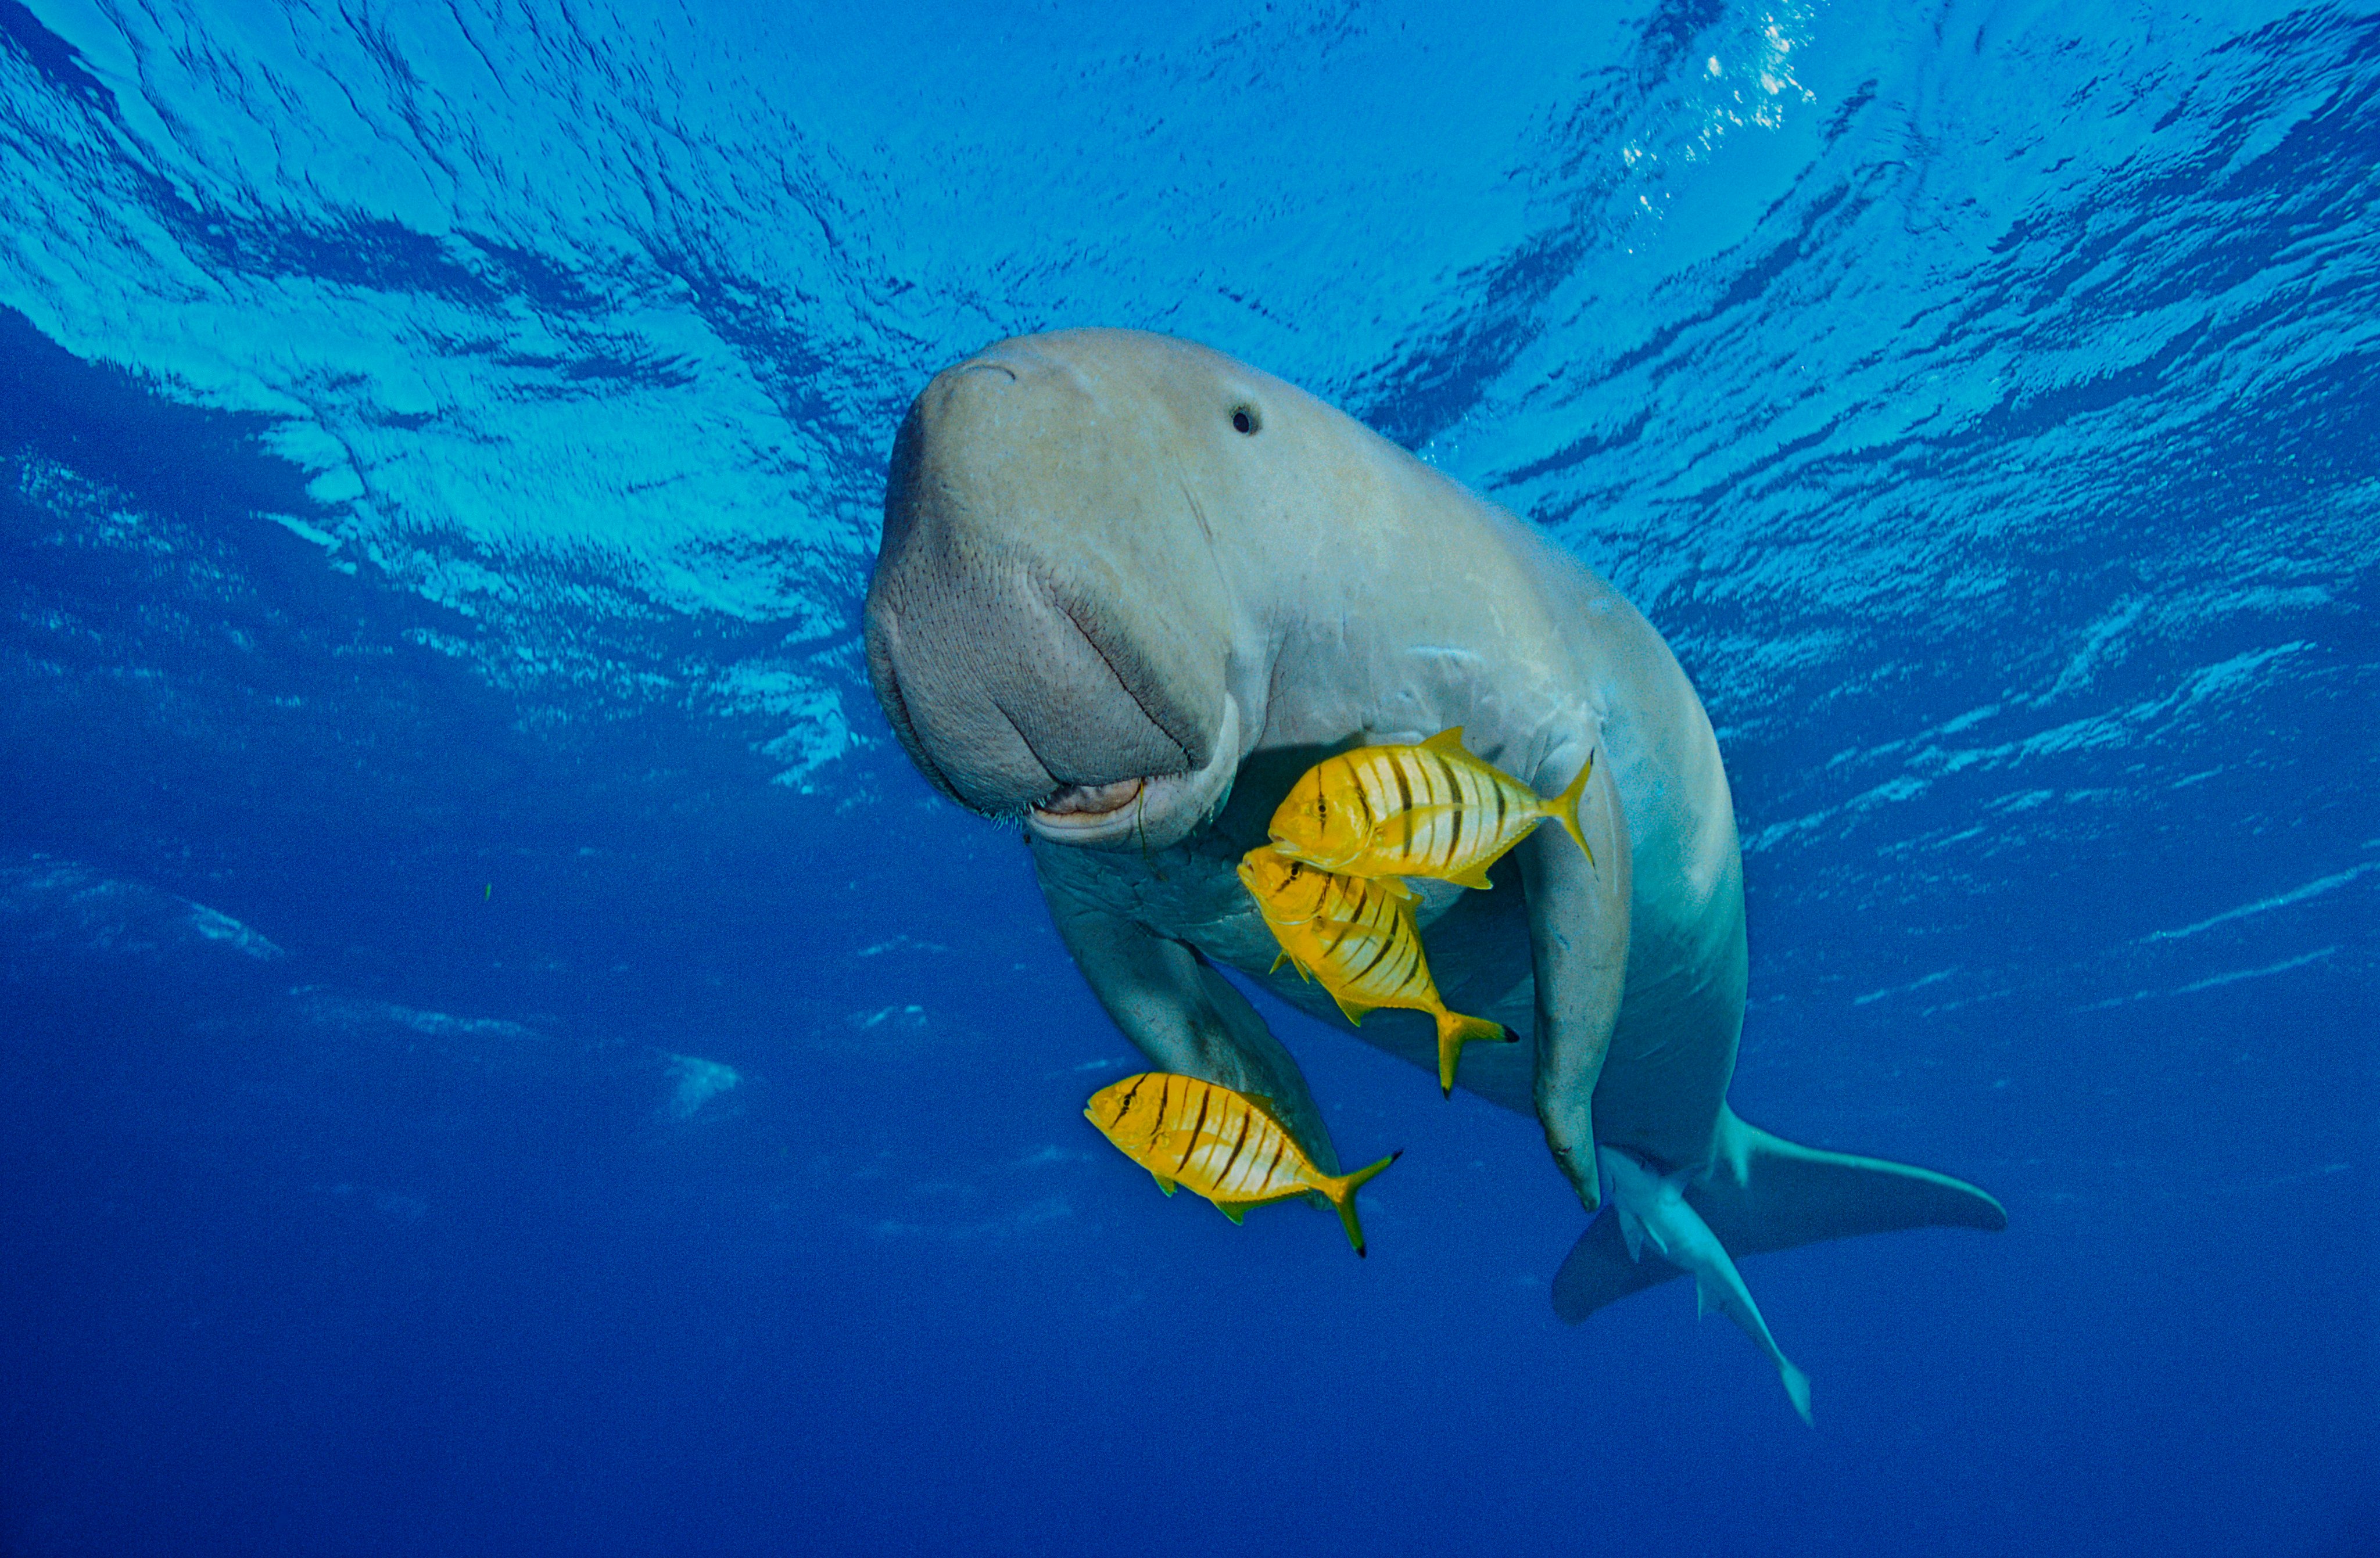 Mozambique is an unsung gem of African tourism. The Bazaruto Archipelago offers a chance to get up close to a wide range of marine life – including the elusive dugong (above) – without being too invasive. Photo: Getty Images